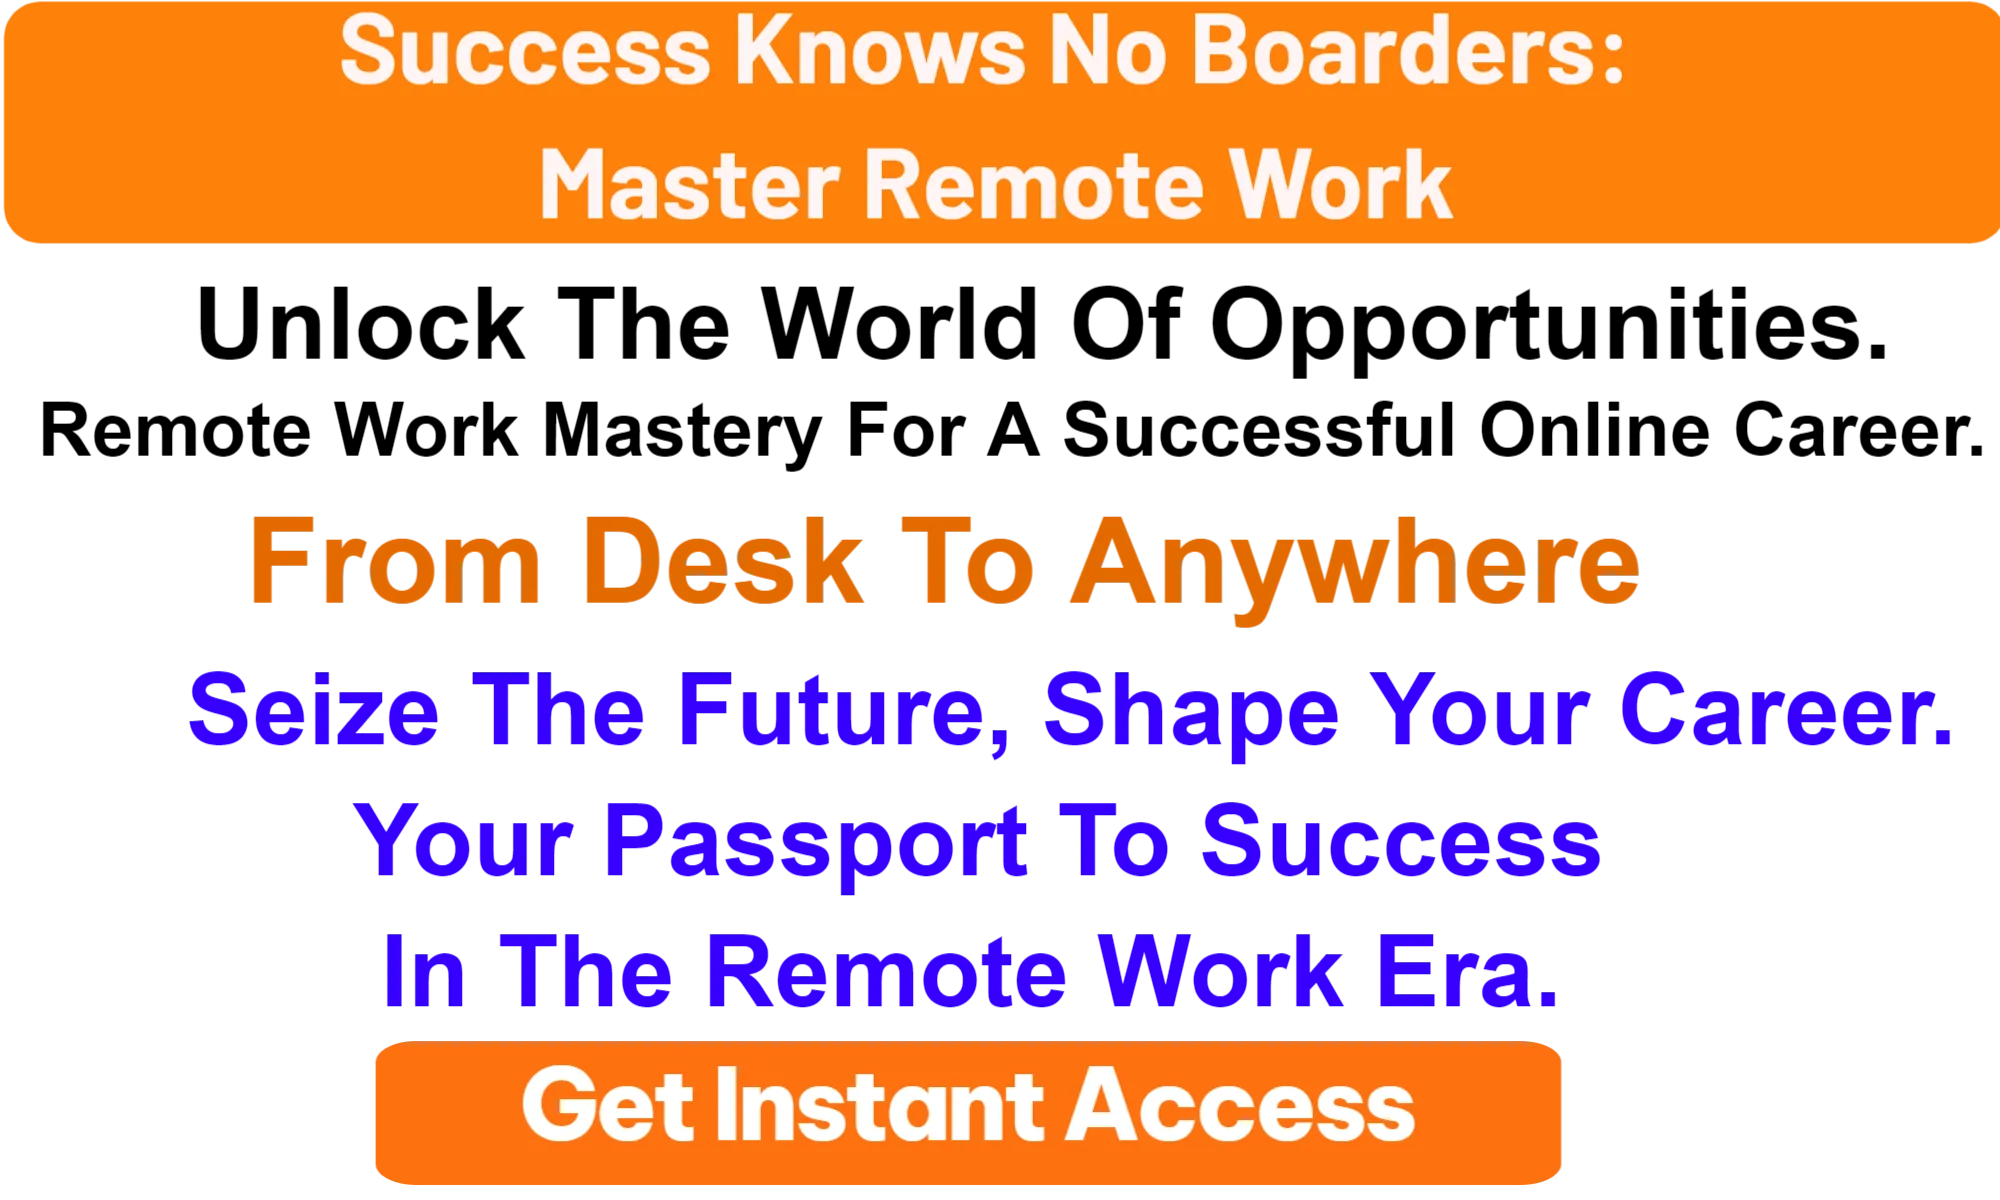 Remote Work Domination; Building a Successful Online Career